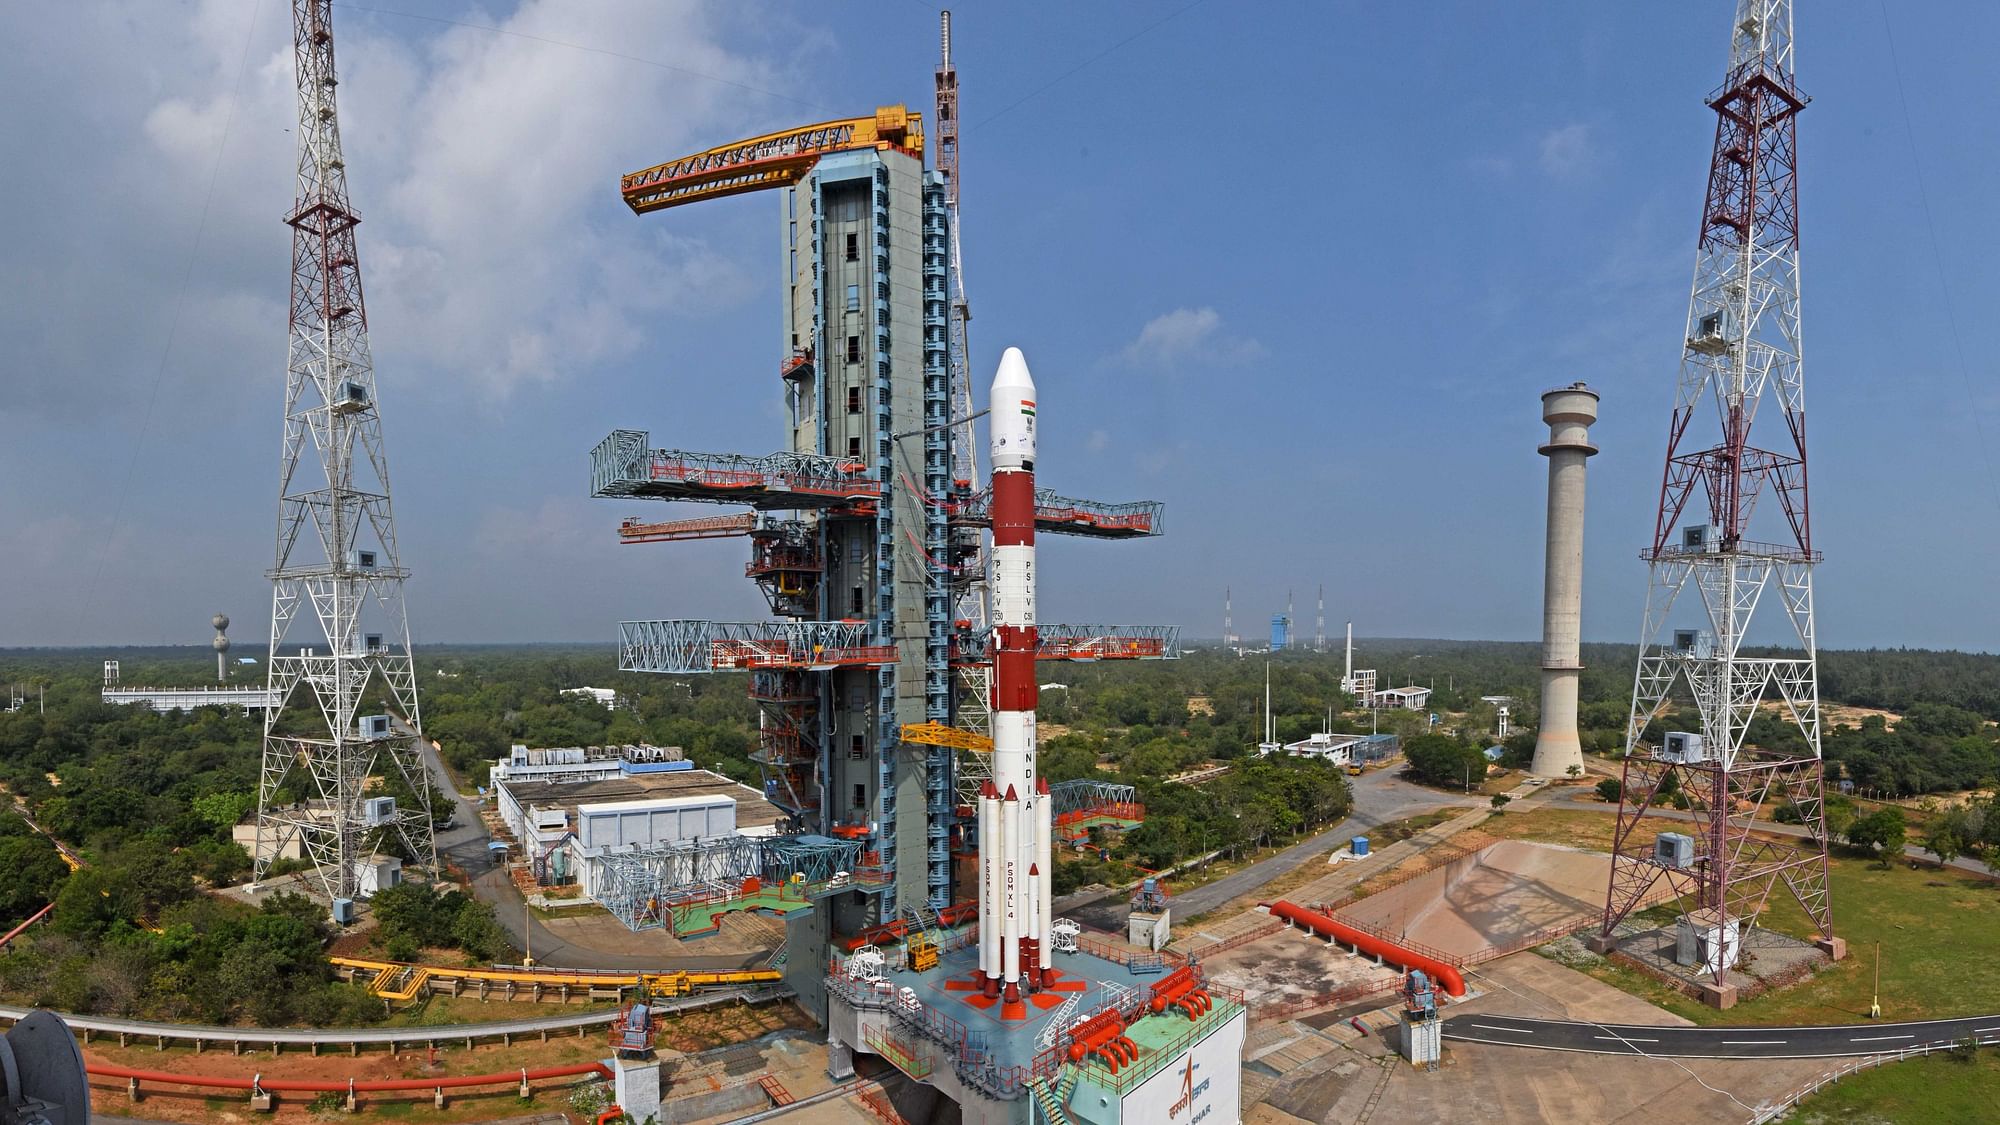 CMS-01 is India’s 42nd communication satellite, with a life span of seven years